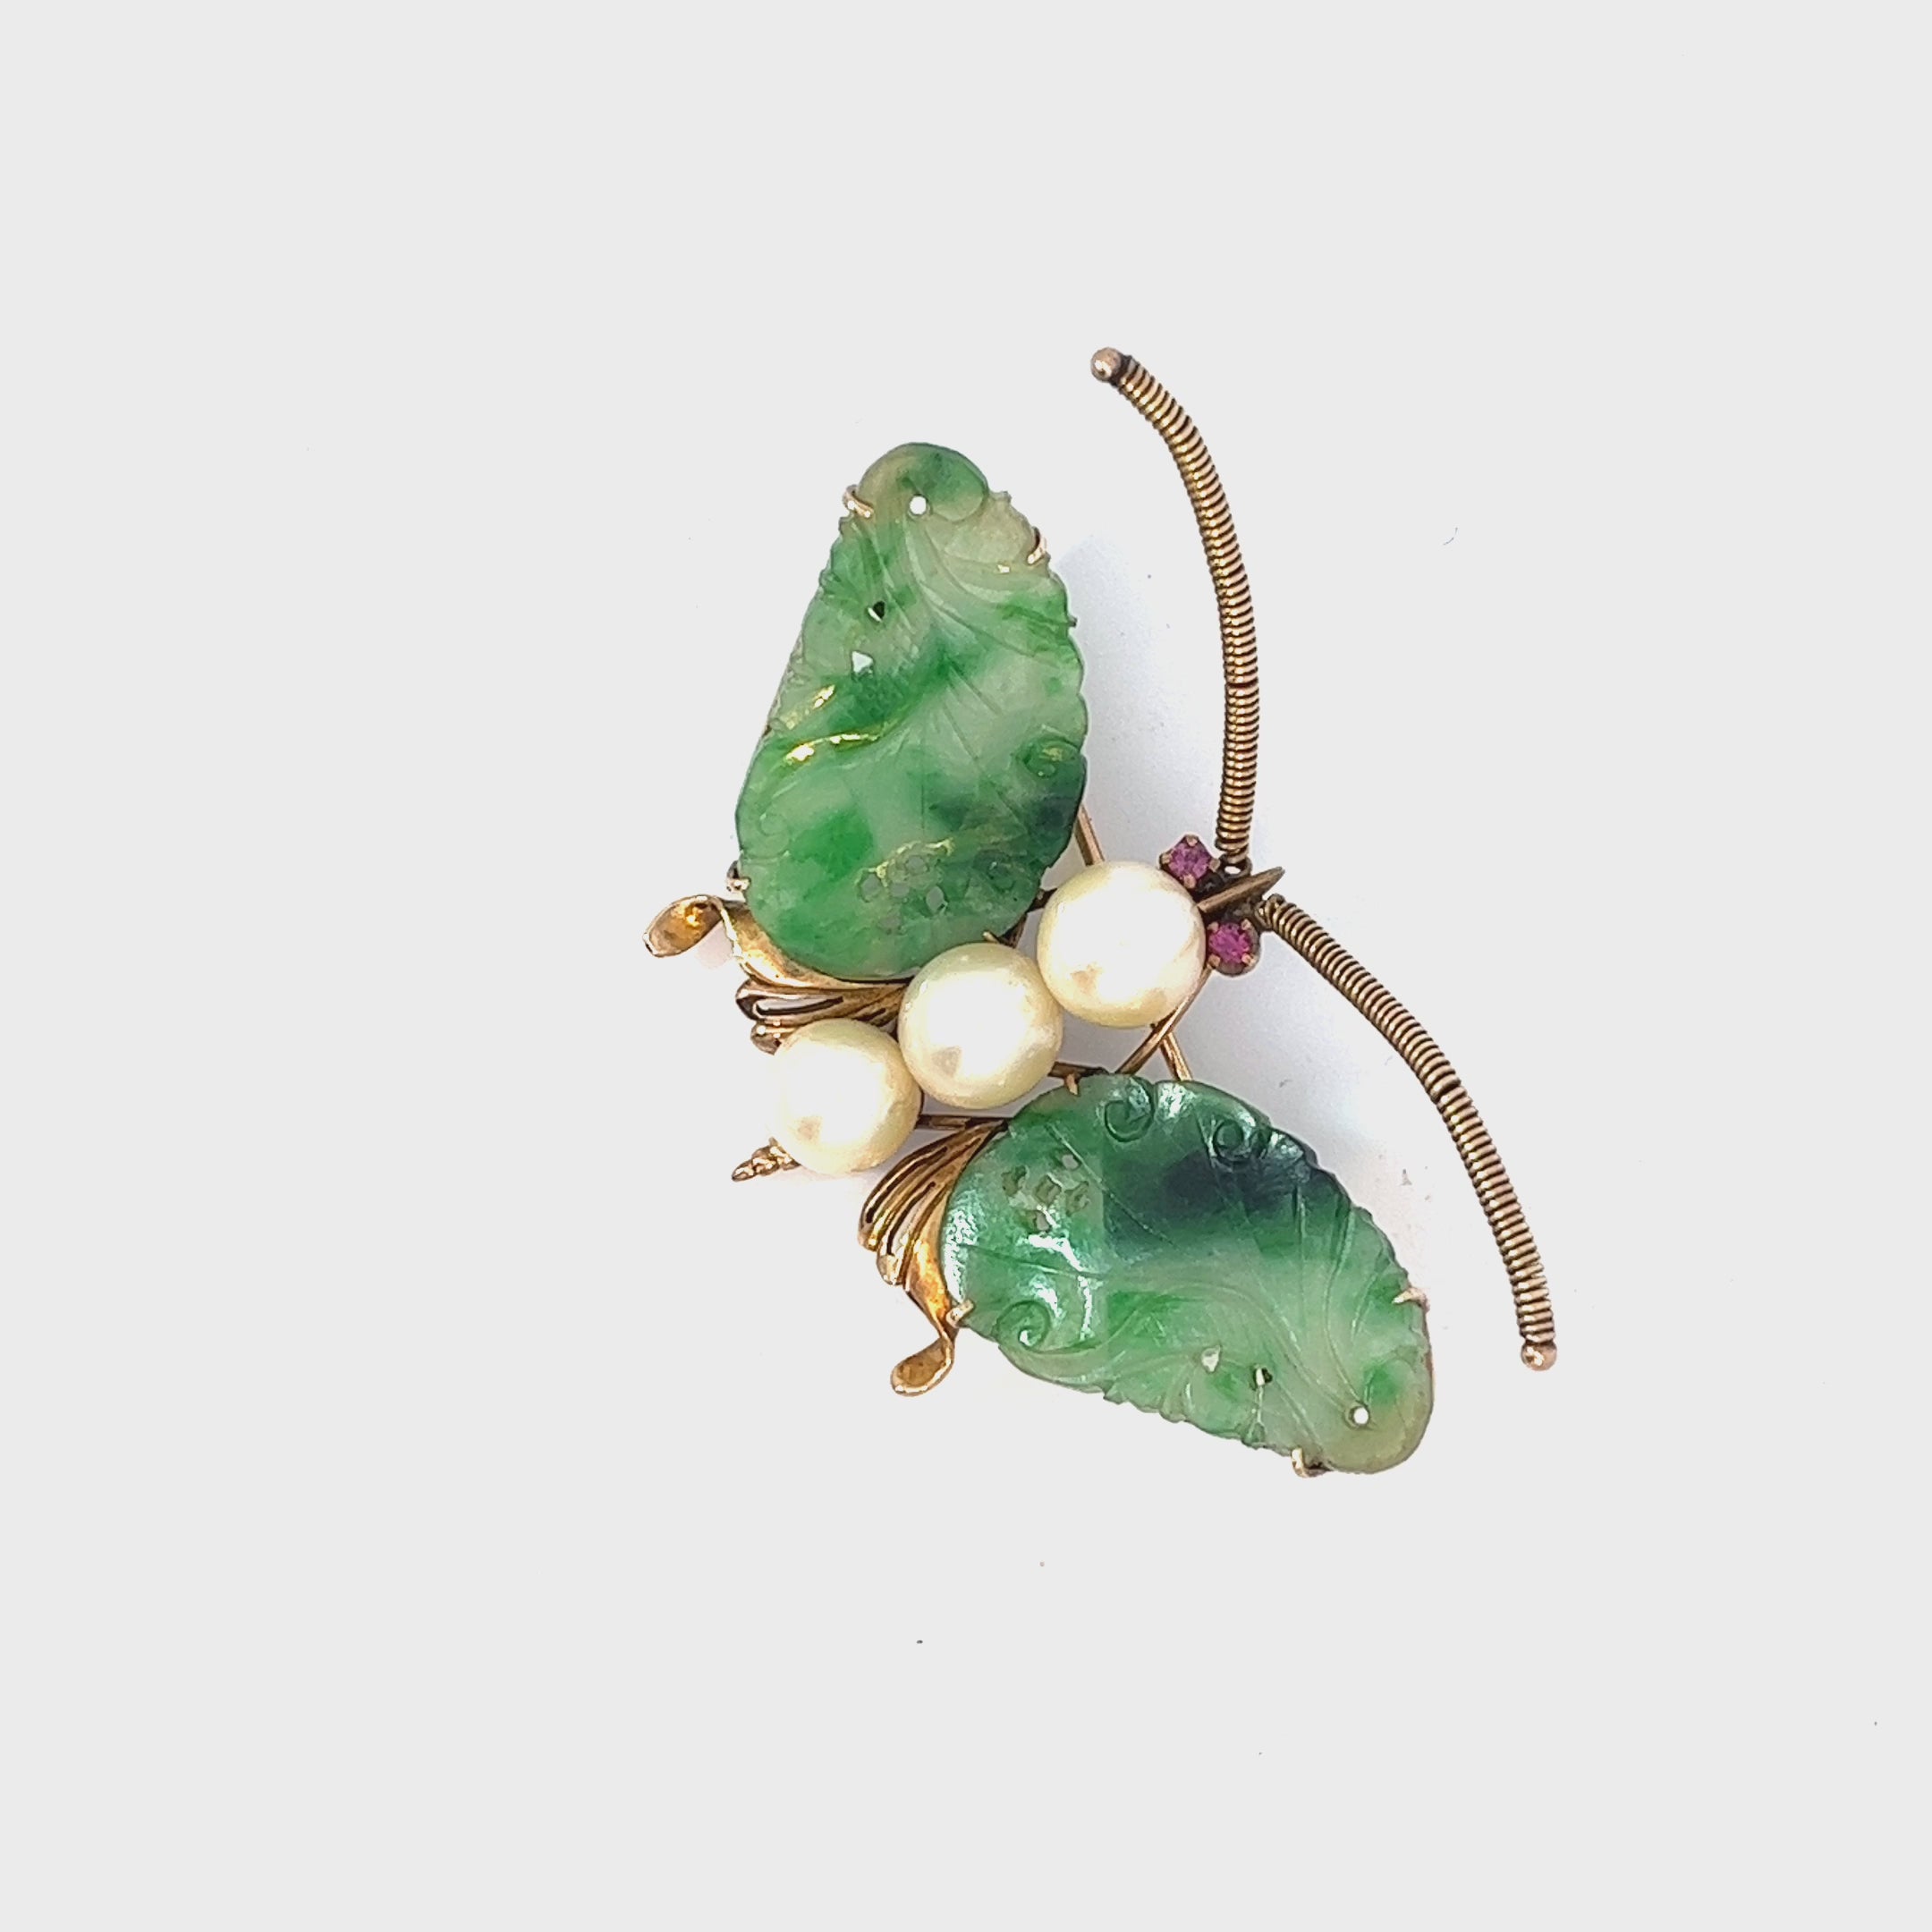 14K  YELLOW GOLD 3 PEARLS, RUBY EYE AND CARVED JADE "FEI CUI" TRANSLUCENT , COLOR MOTTLED GREEN , SPECIES : JADEITE JADE AND TYPE  A AND 10.71 GRAMS